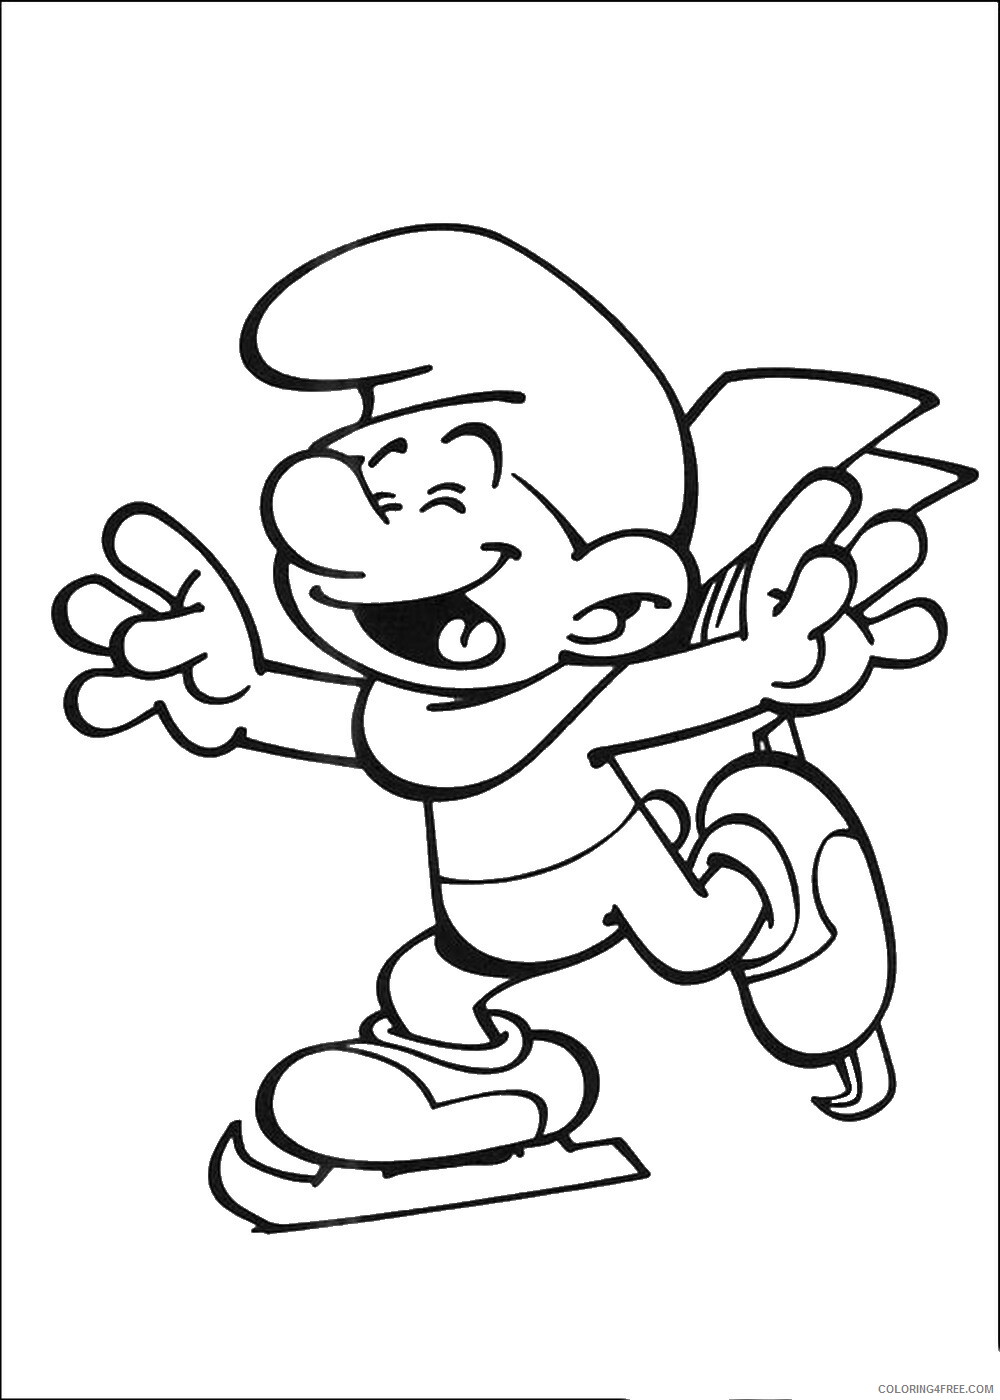 The Smurfs Coloring Pages TV Film smurfs_21 Printable 2020 09722 Coloring4free